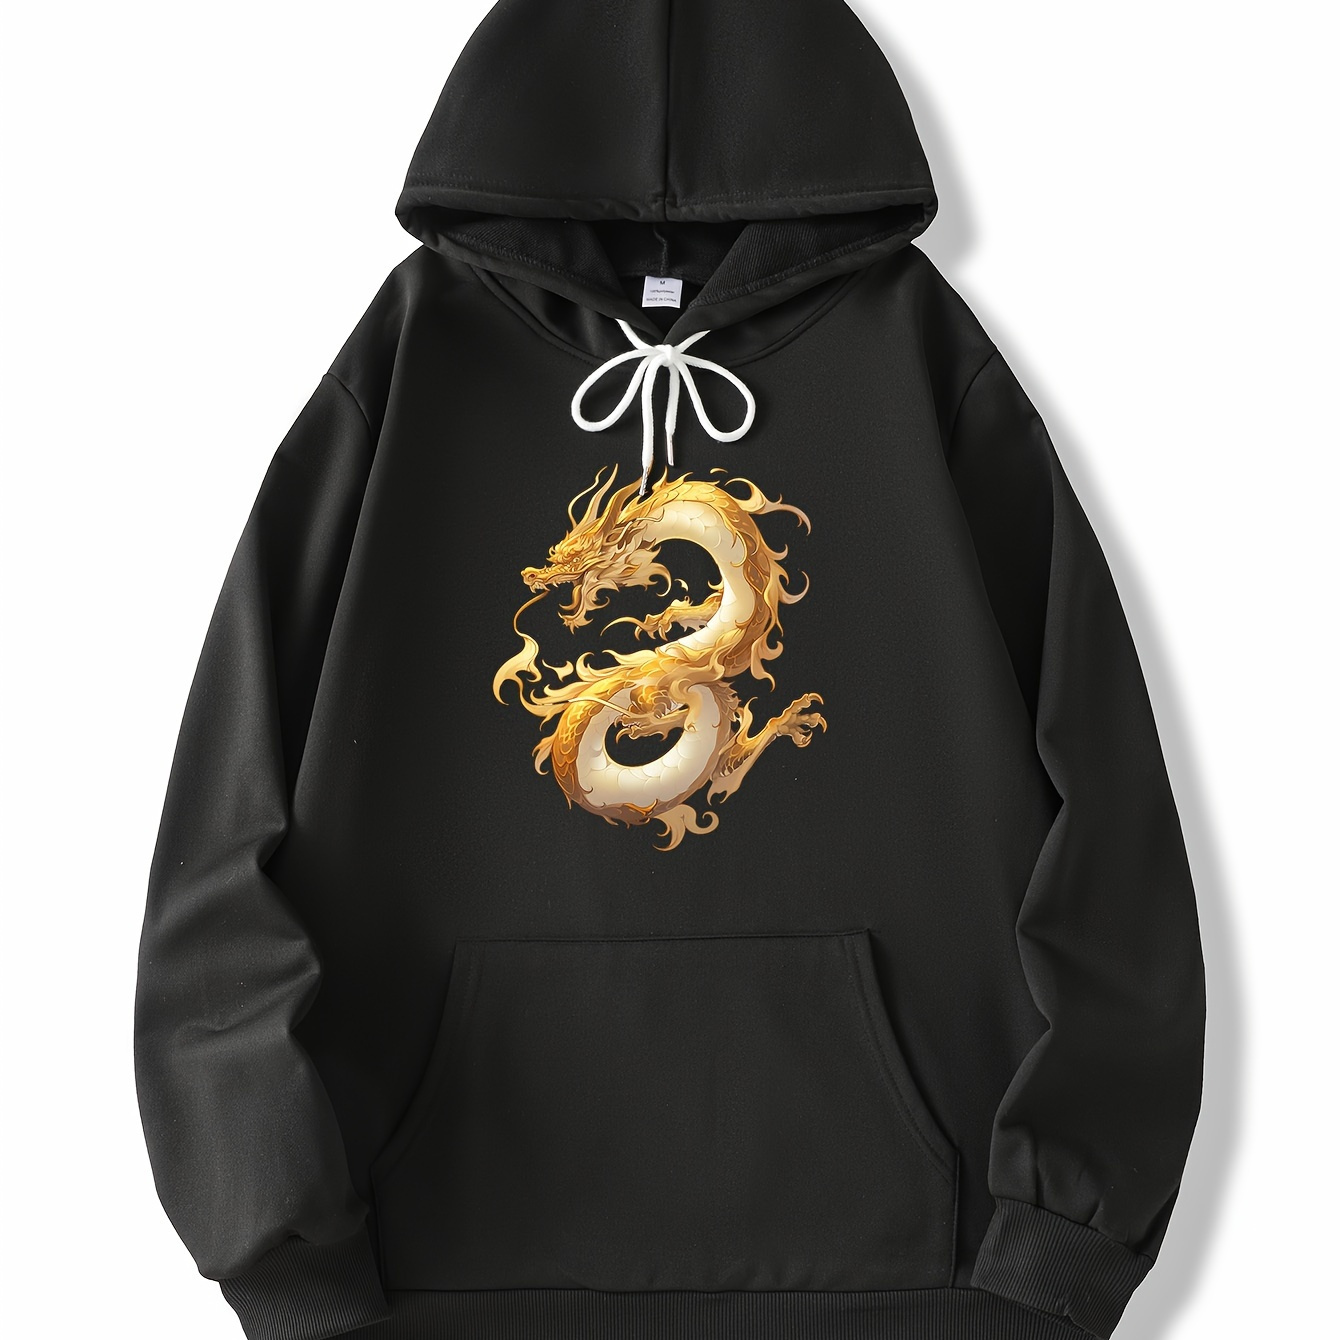 

Chinese Dragon Pattern Print Hooded Sweatshirt, Fancy Hoodies Fashion Casual Tops For Spring Autumn, Men's Clothing